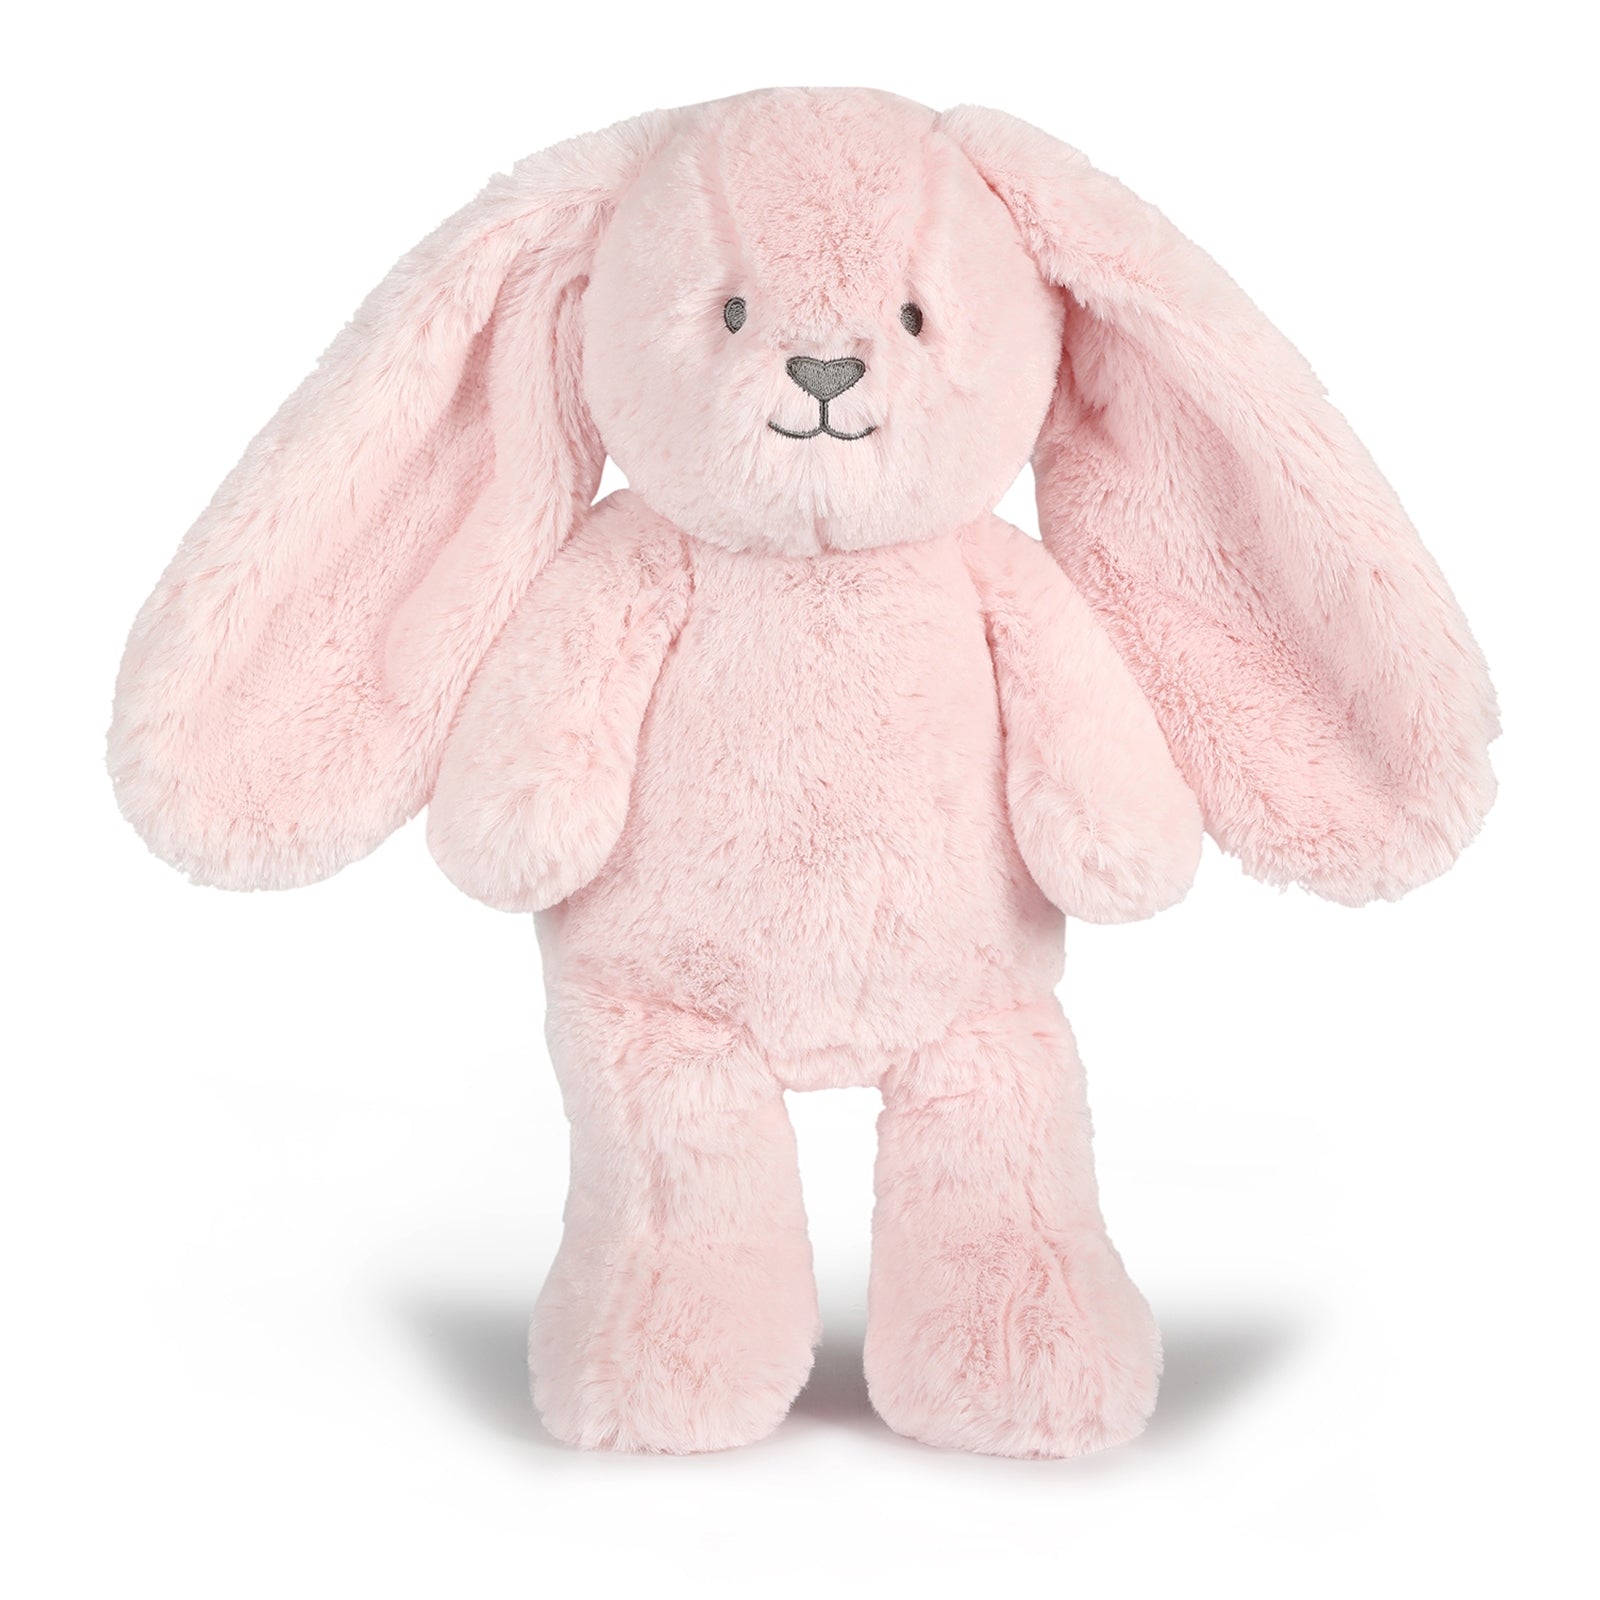 Betsy Pink Bunny stuffed animal, Designed by OB in Australia